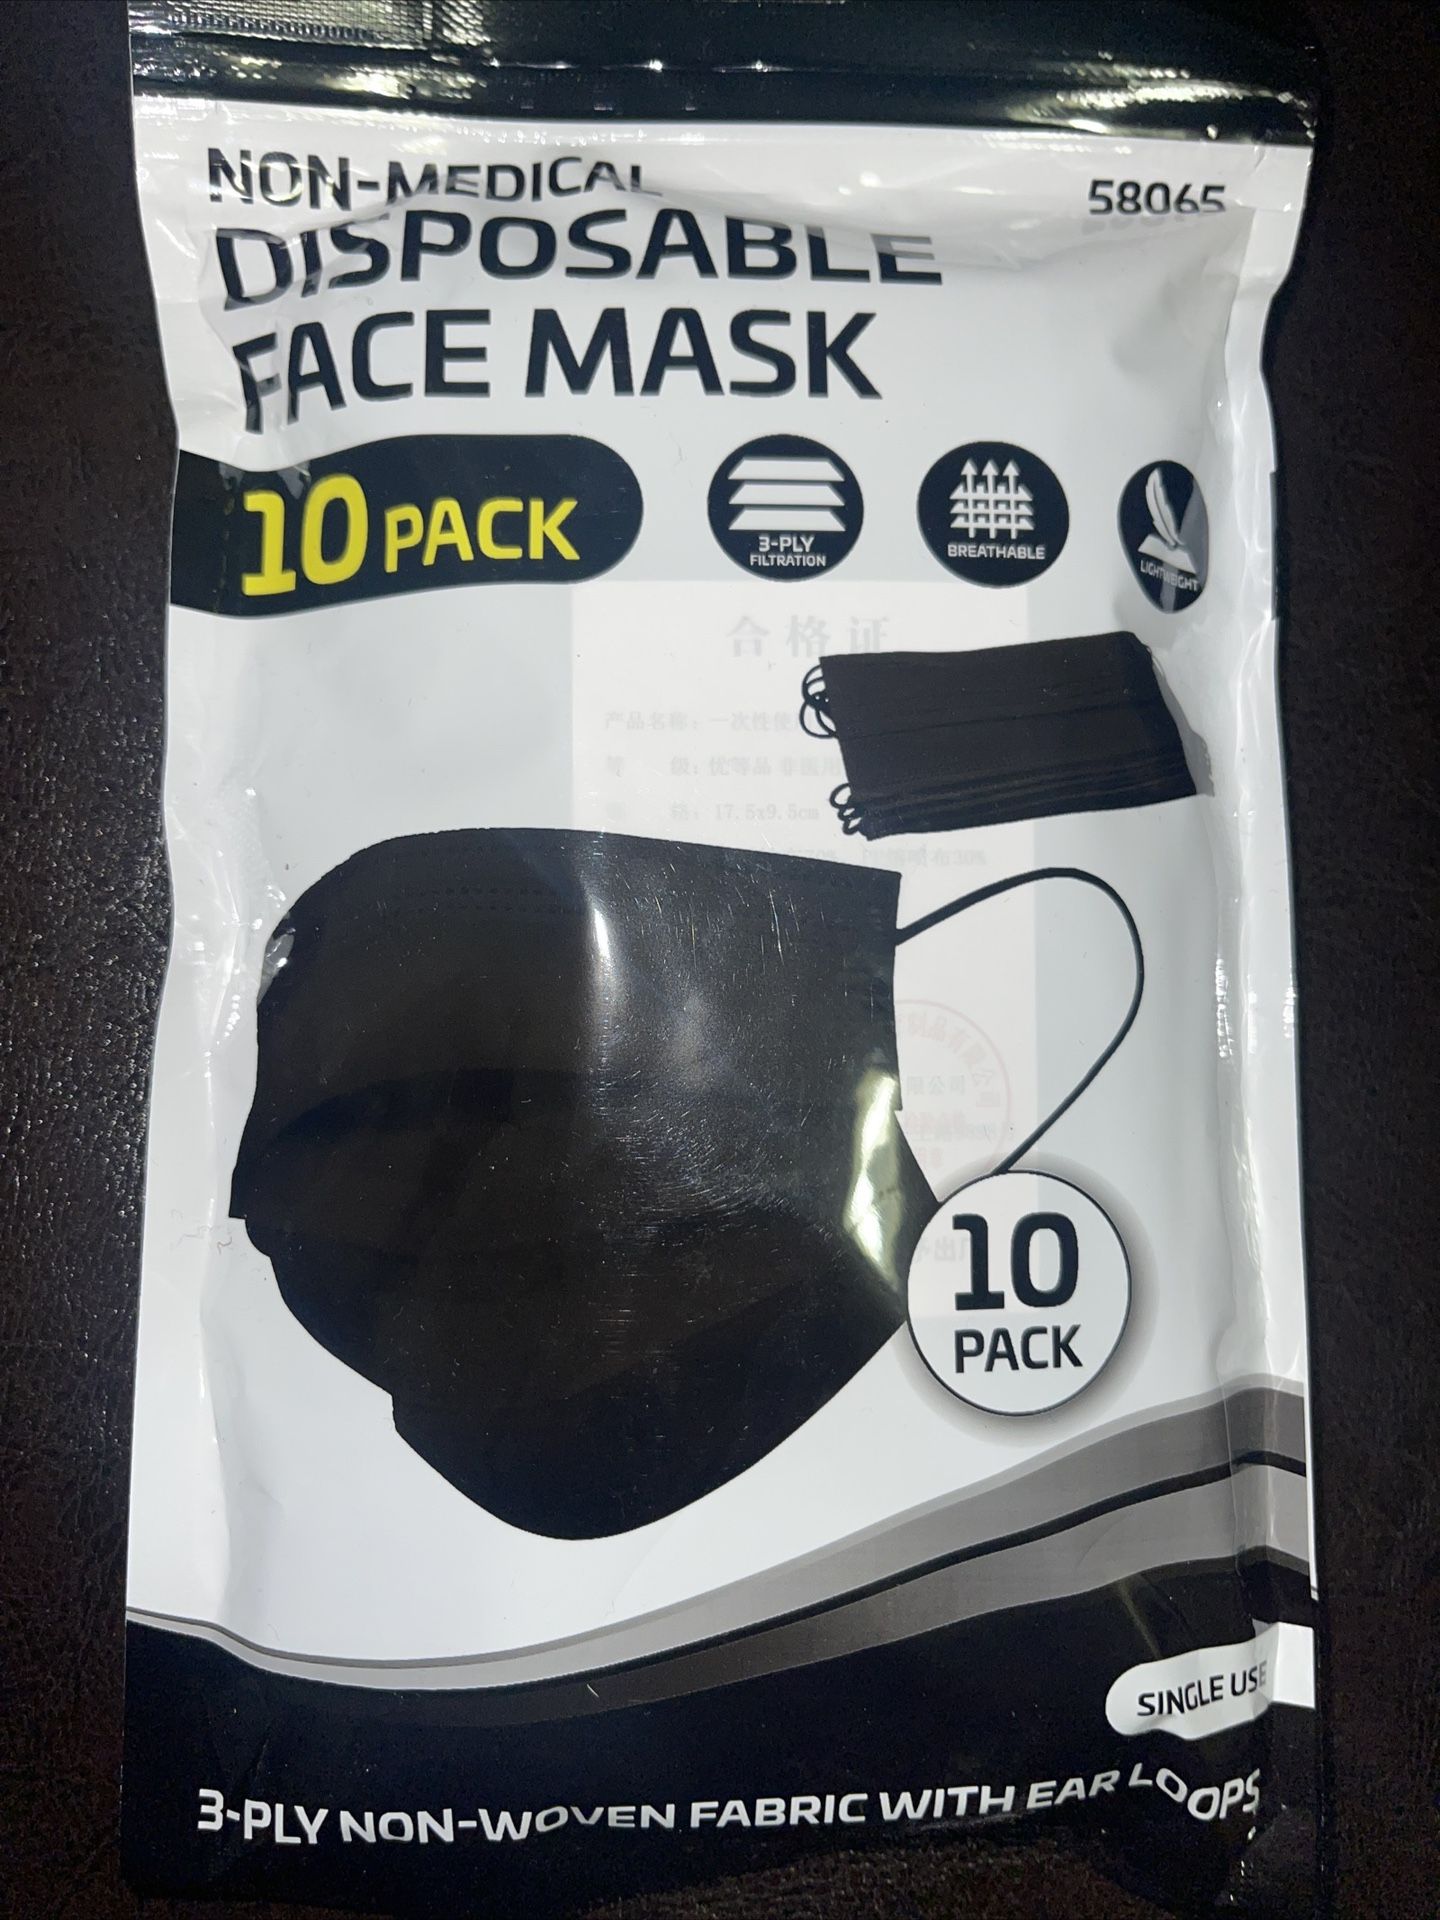 10 Pack Disposable Face Masks 😷 BRAND NEW